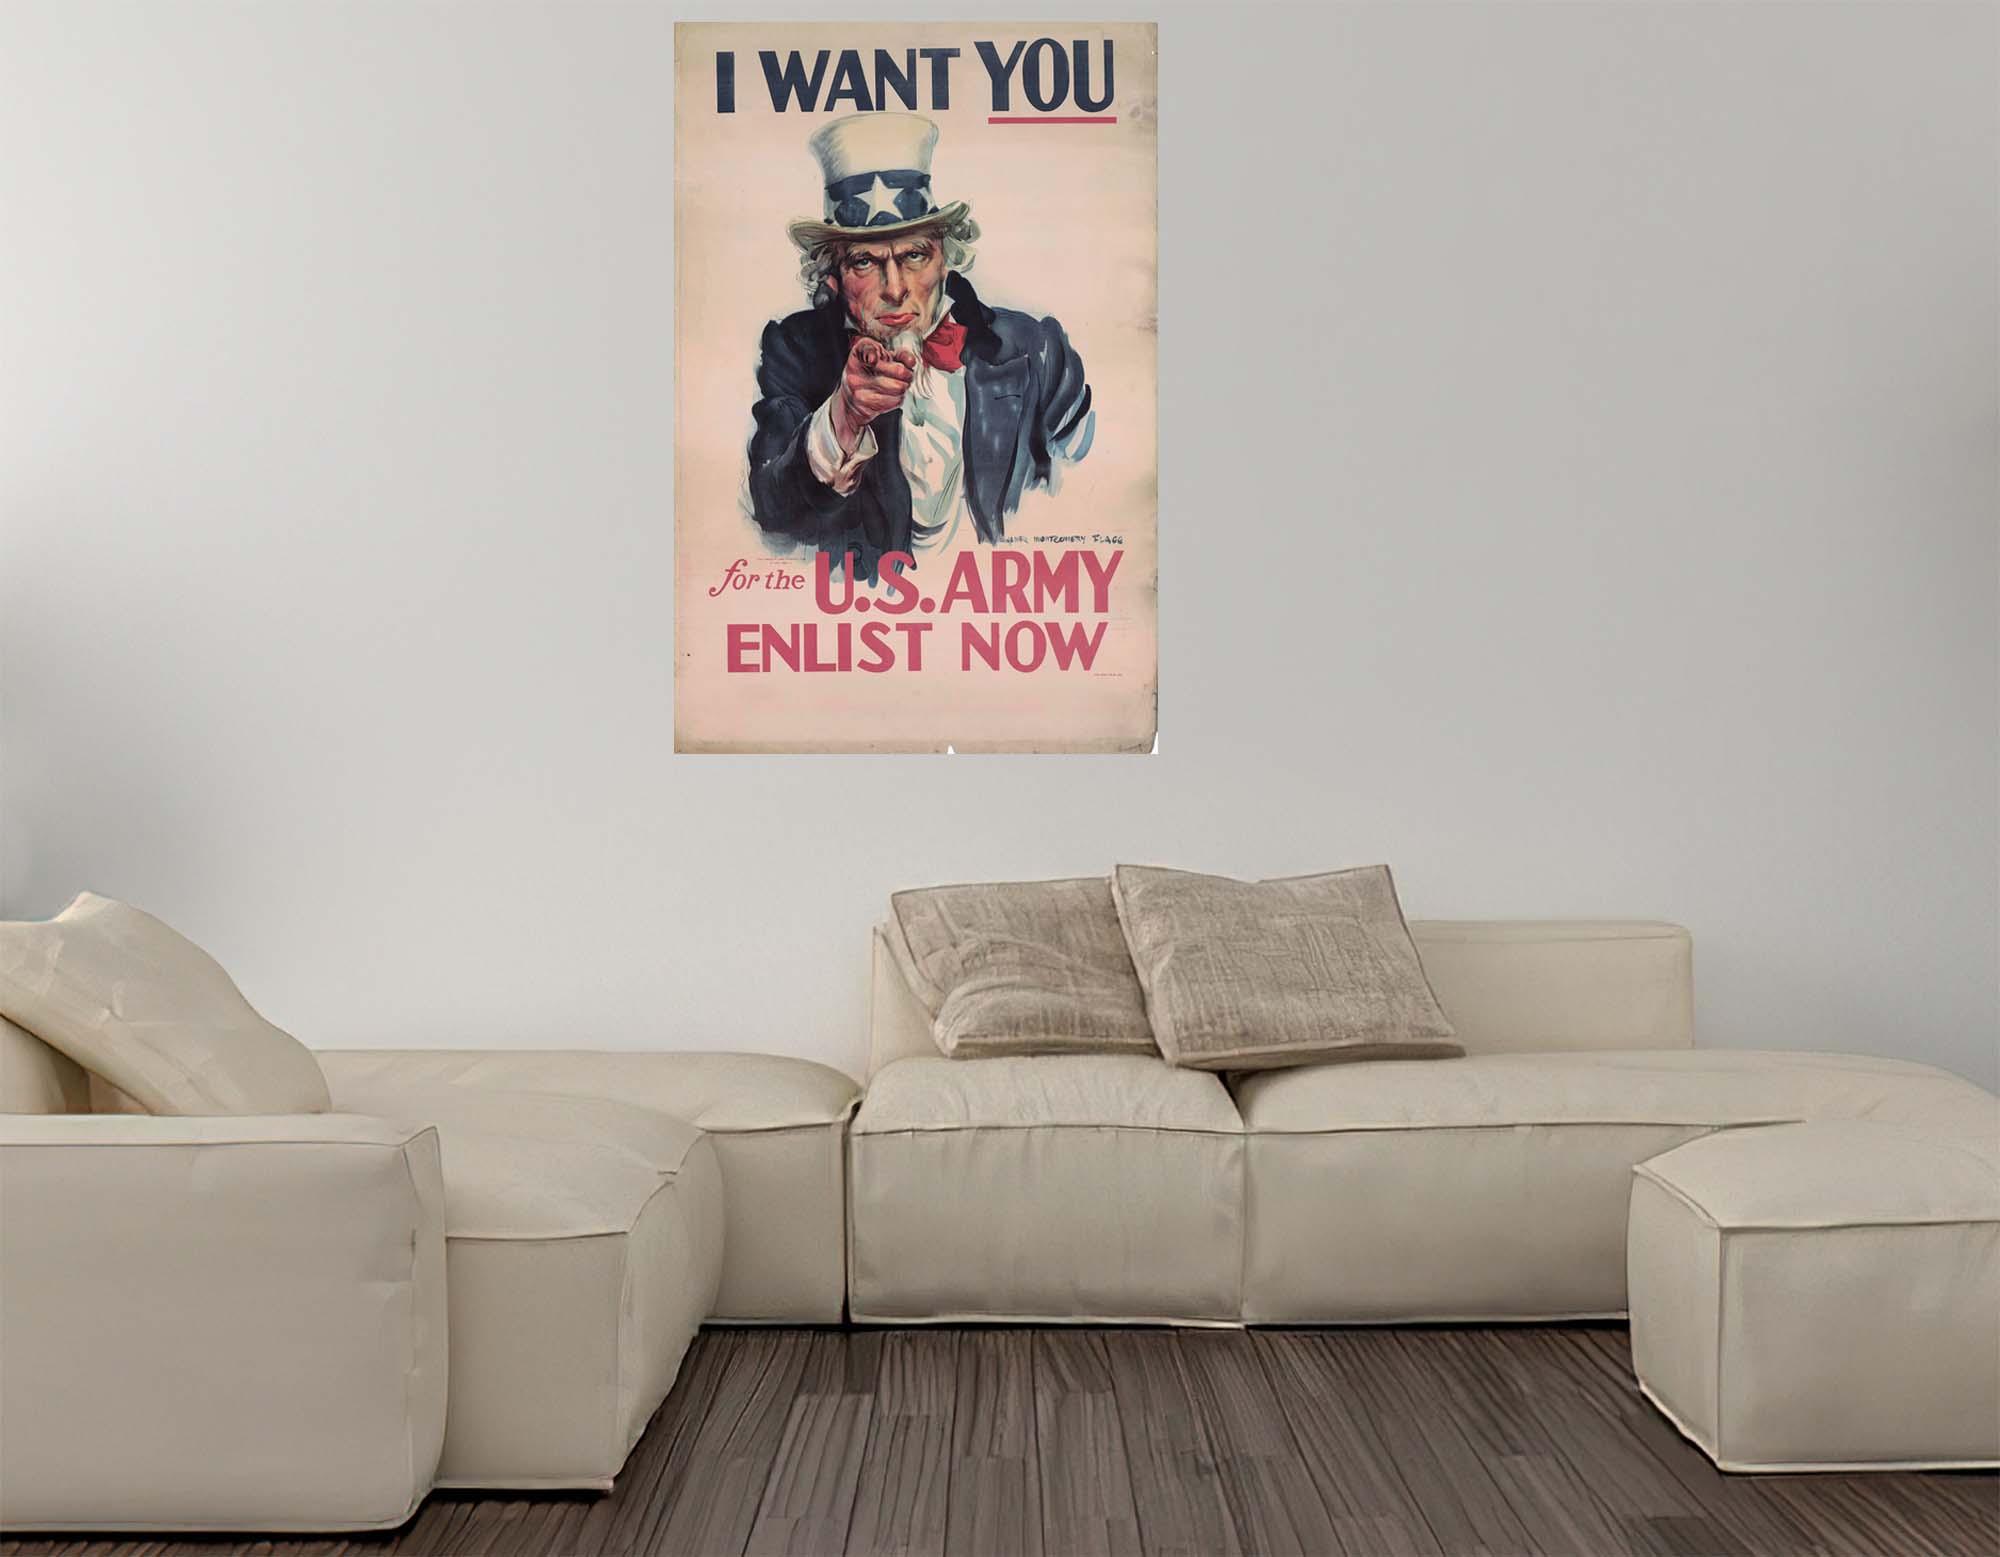 CoolWalls.ca diecut I Want You (No Border) Vintage Poster, Wall Decal Sticker Wallpaper, PEEL-N-STICK, removable anytime. Great for a classroom